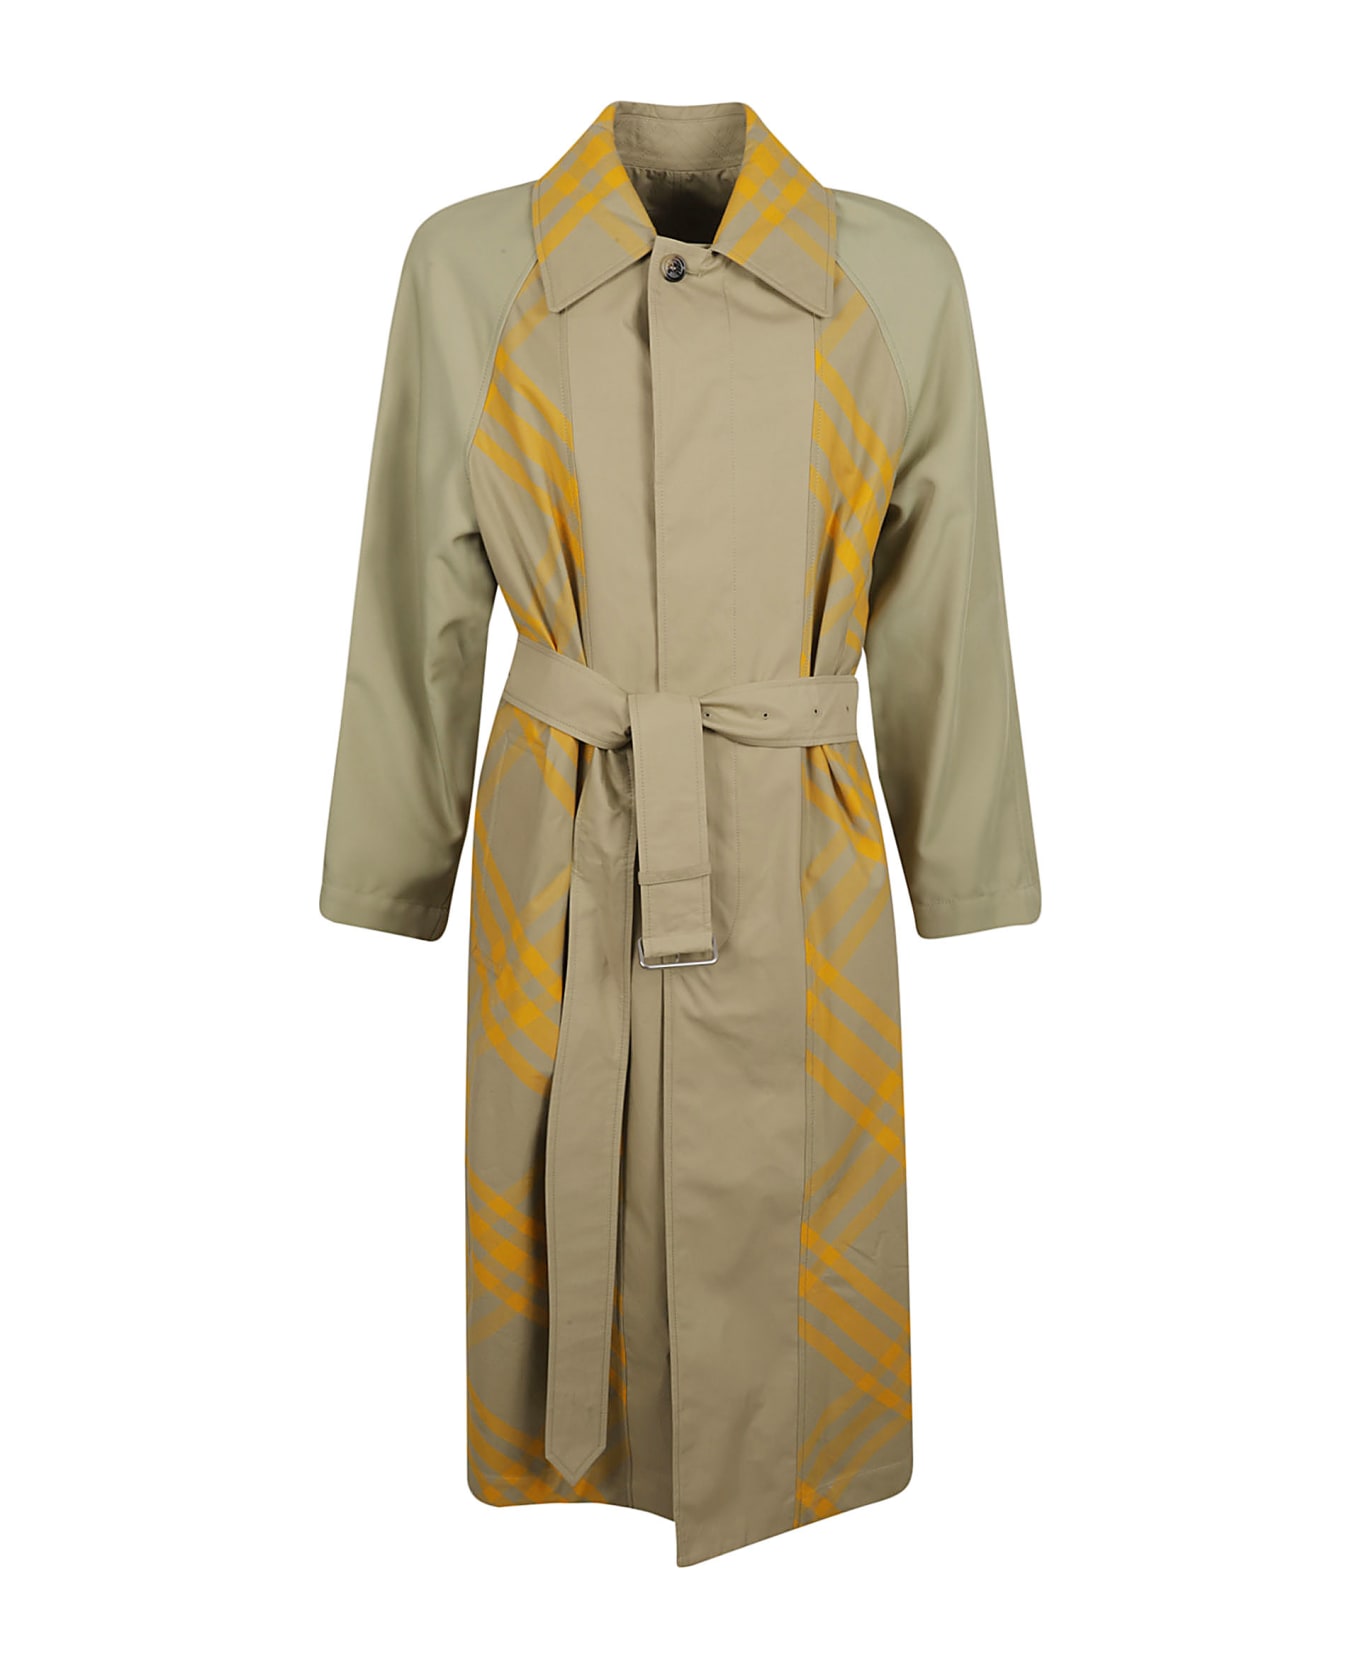 Burberry Printed Long Belted Coat - Beige コート